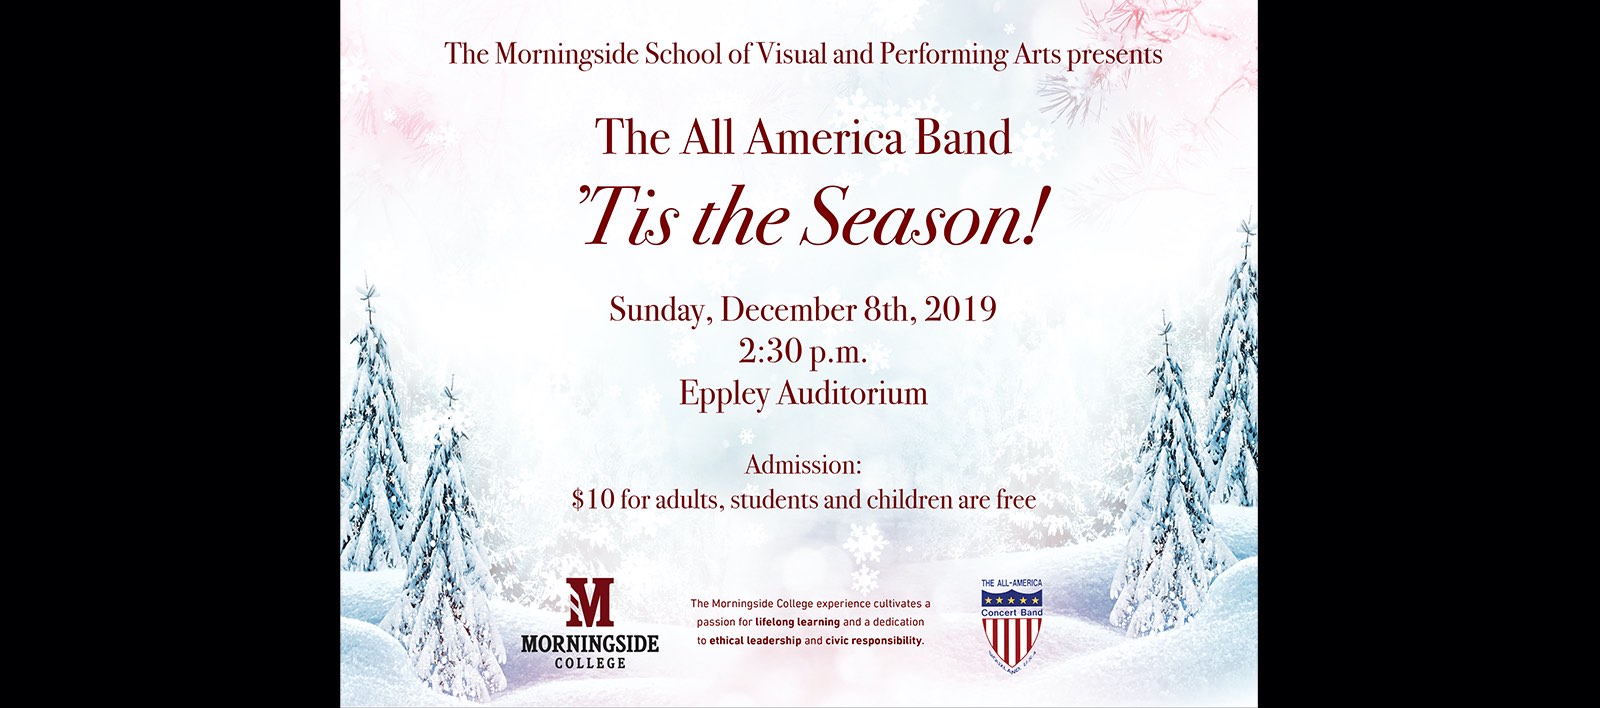 All America Band holiday concert poster